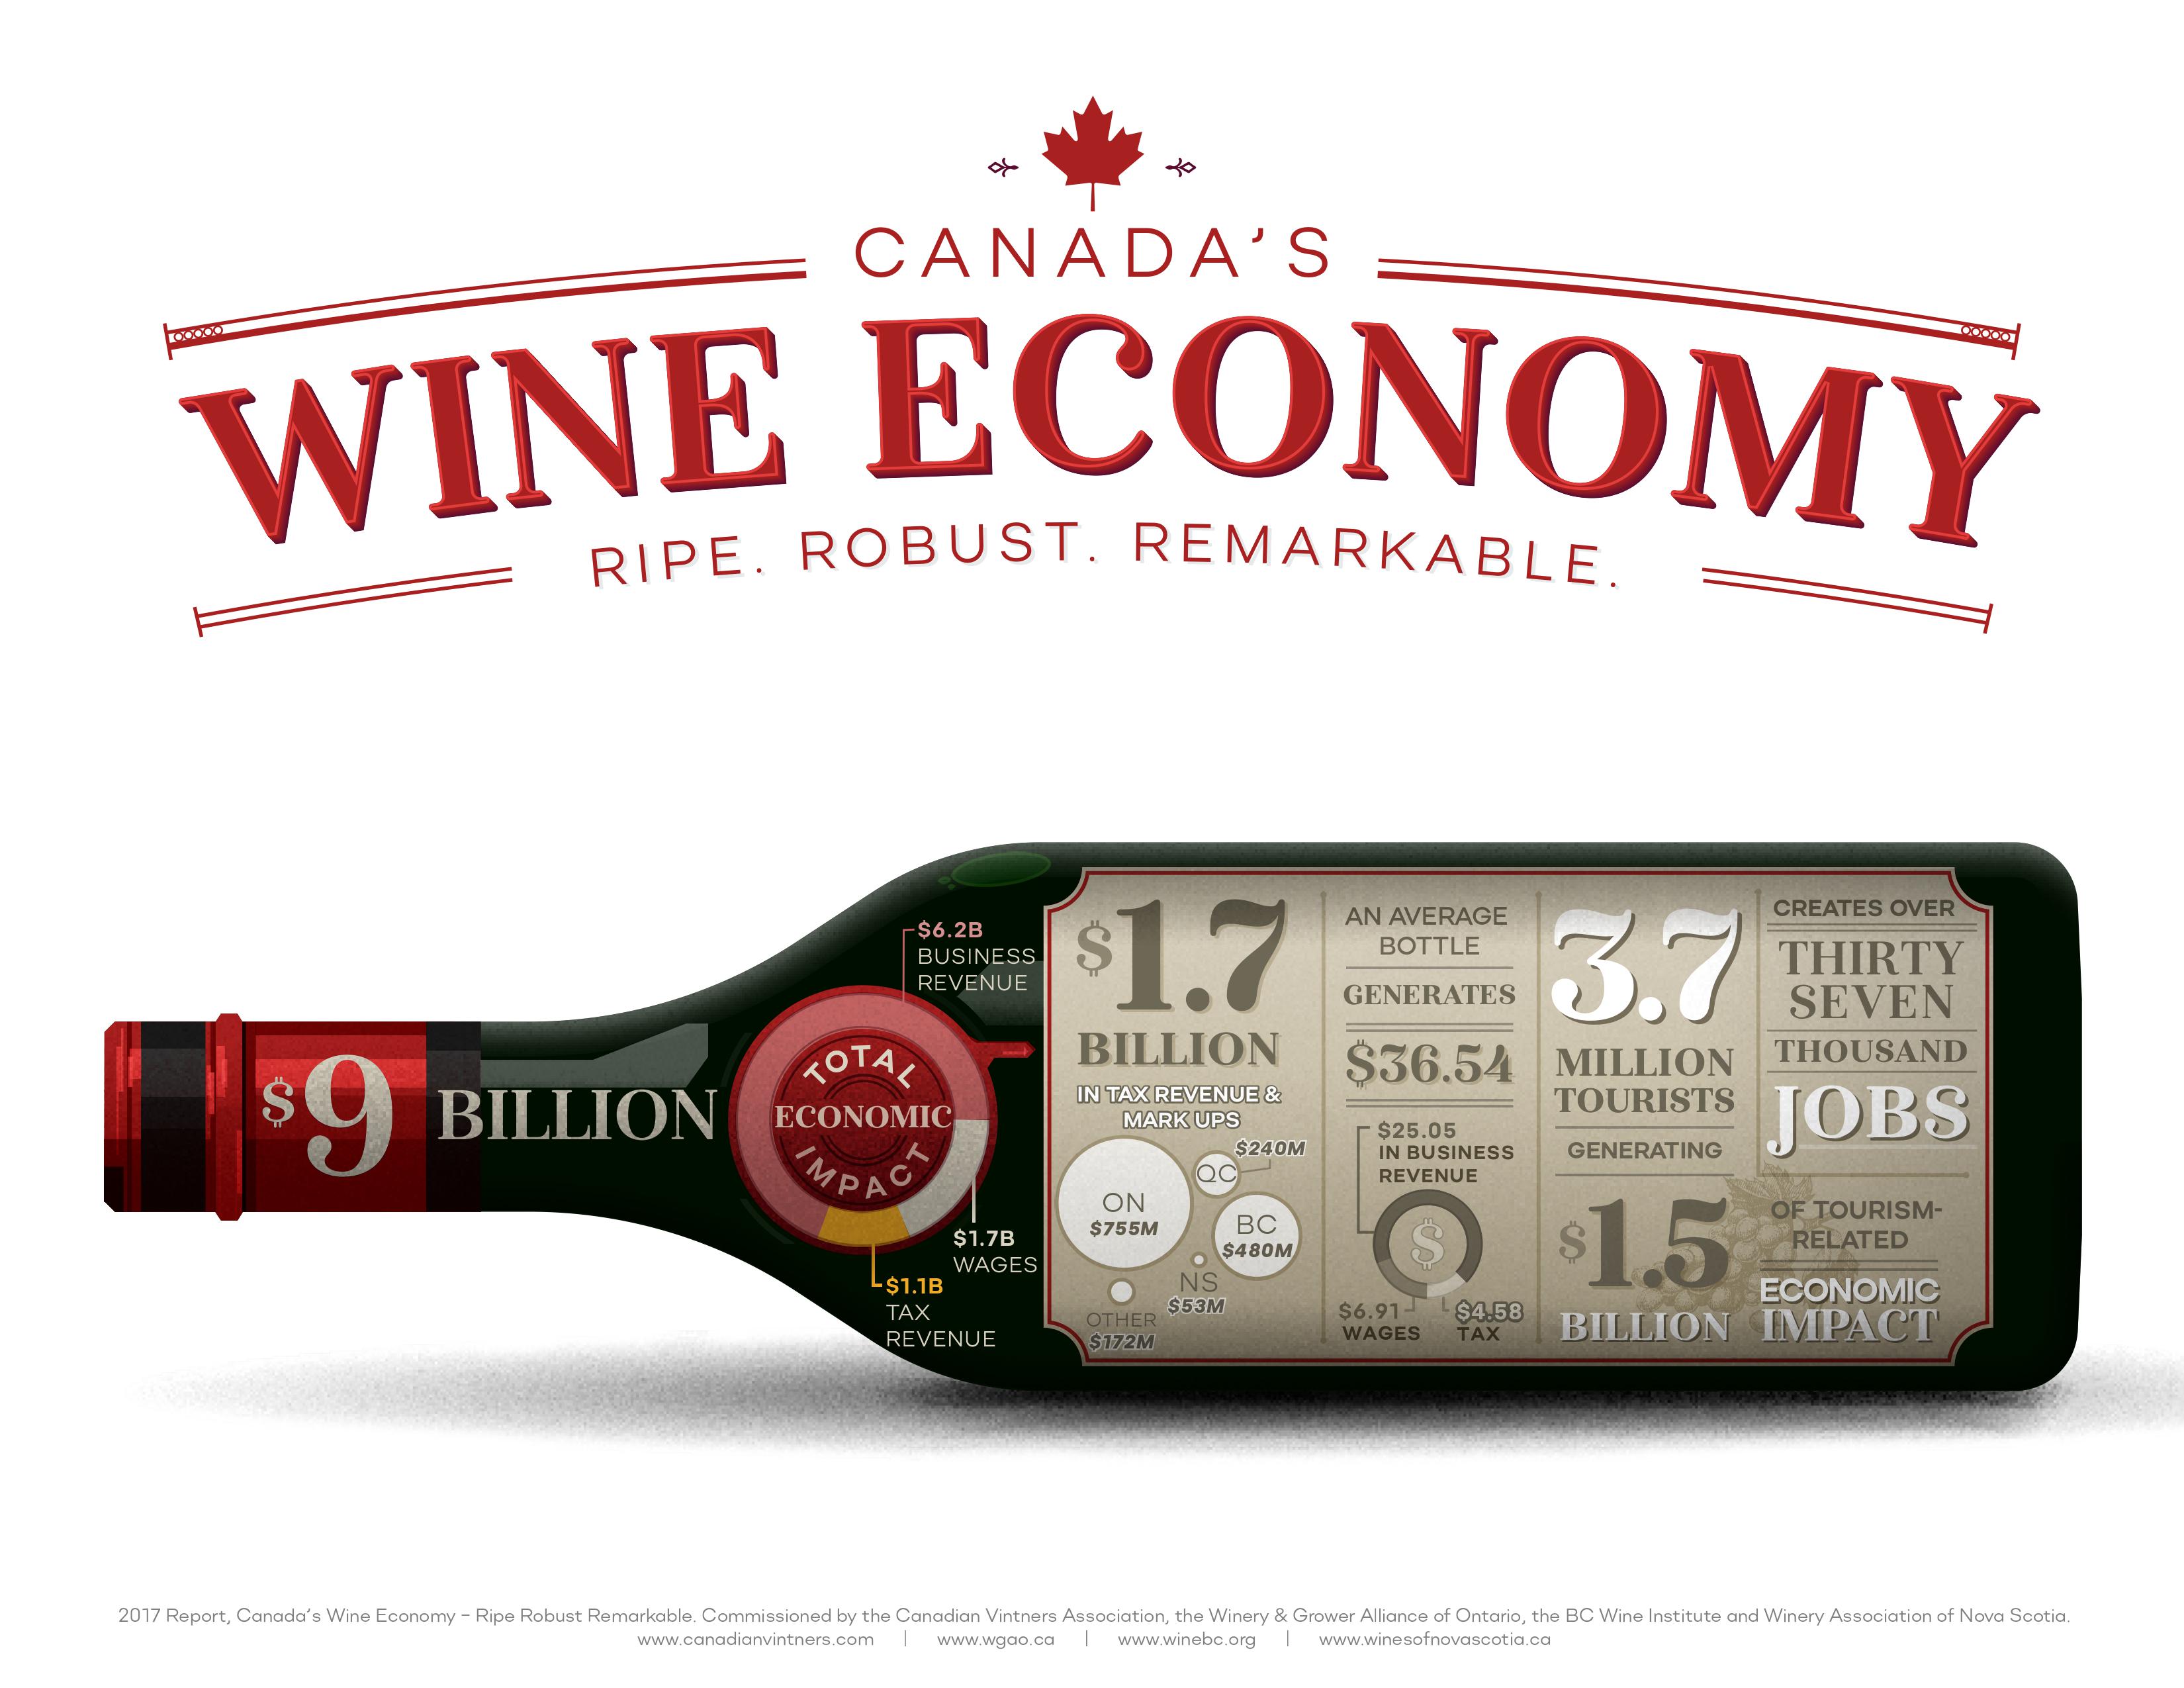 Wine in Canada: #Cdnwine is a growing economic driver